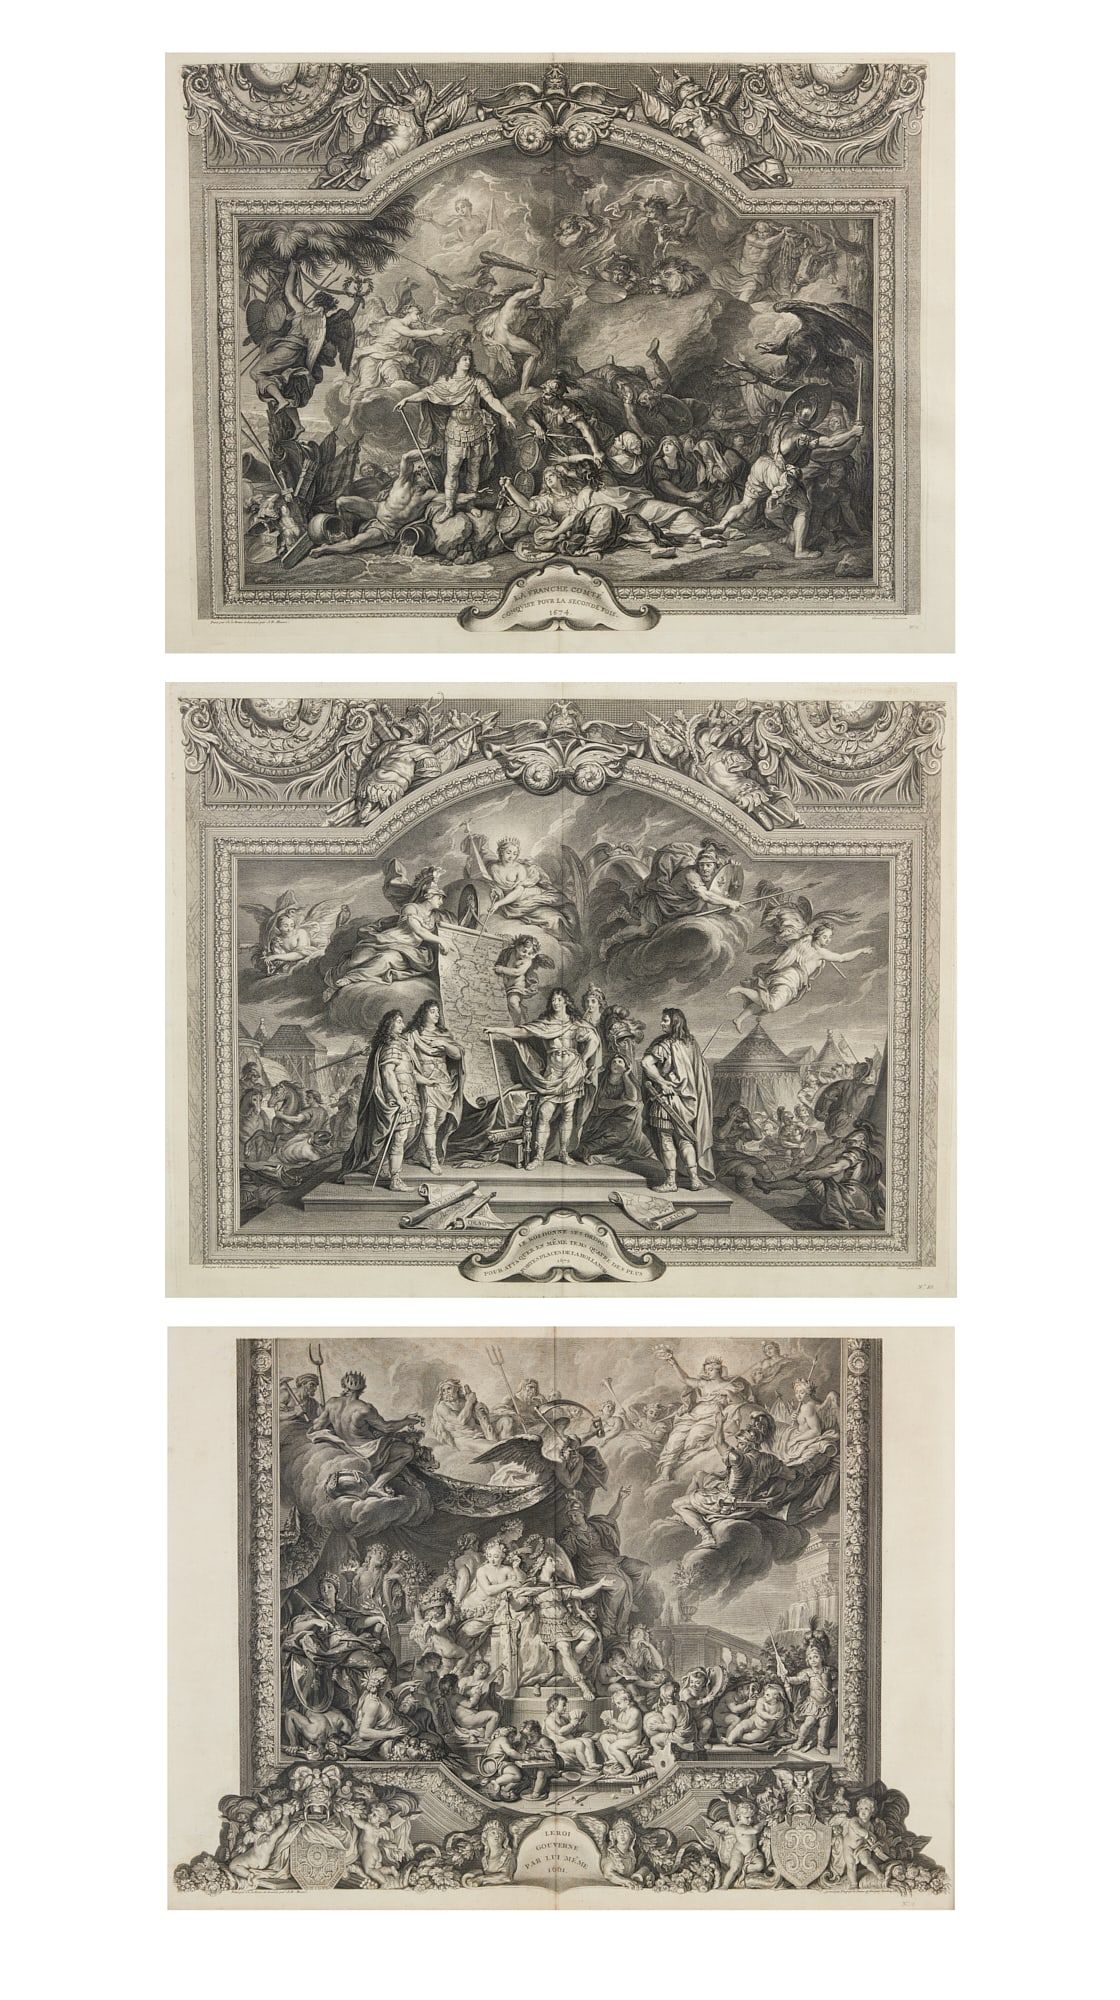 AFTER CHARLES LE BRUN, PALACE OF VERSAILLES